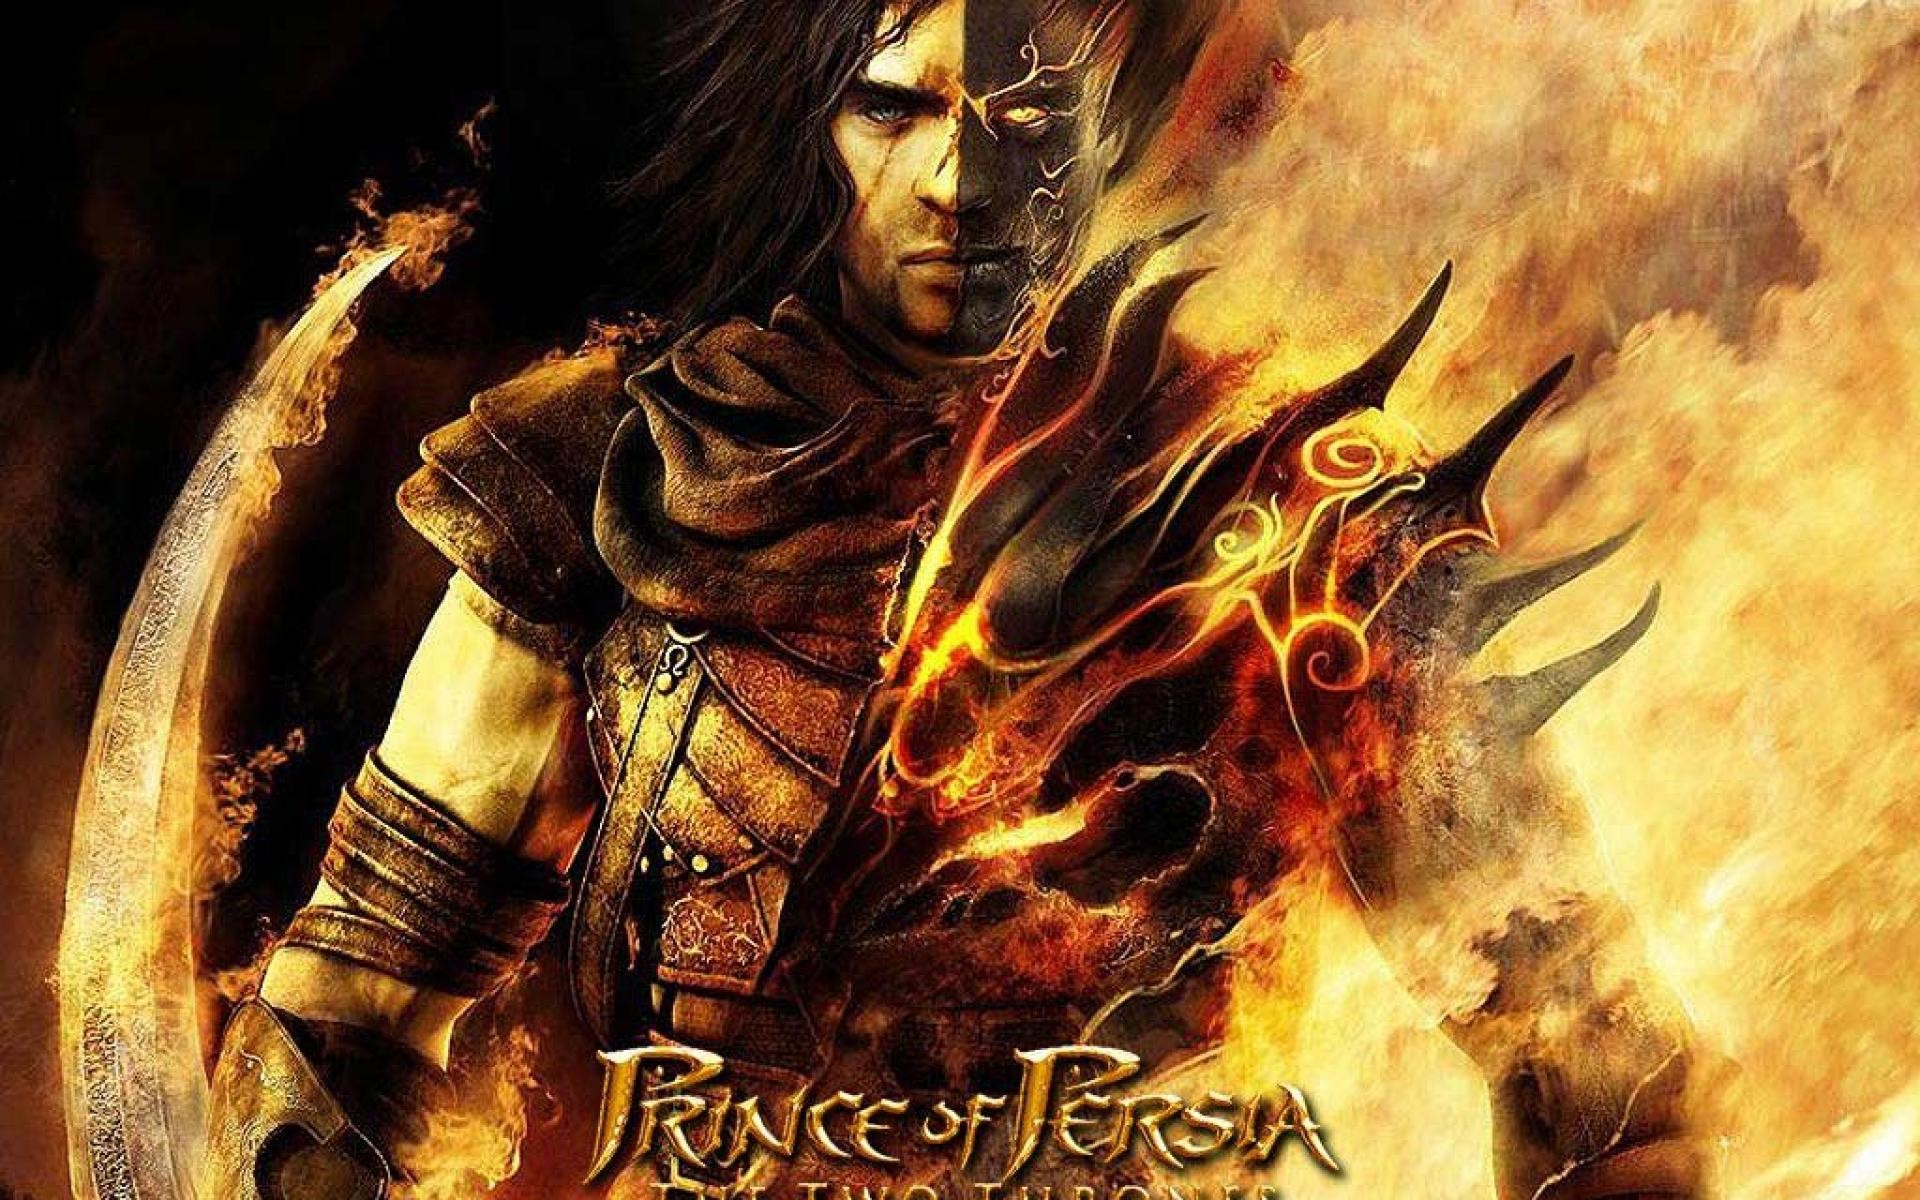 1920x1200 Prince of persia the two thrones daggers games wallpaper .